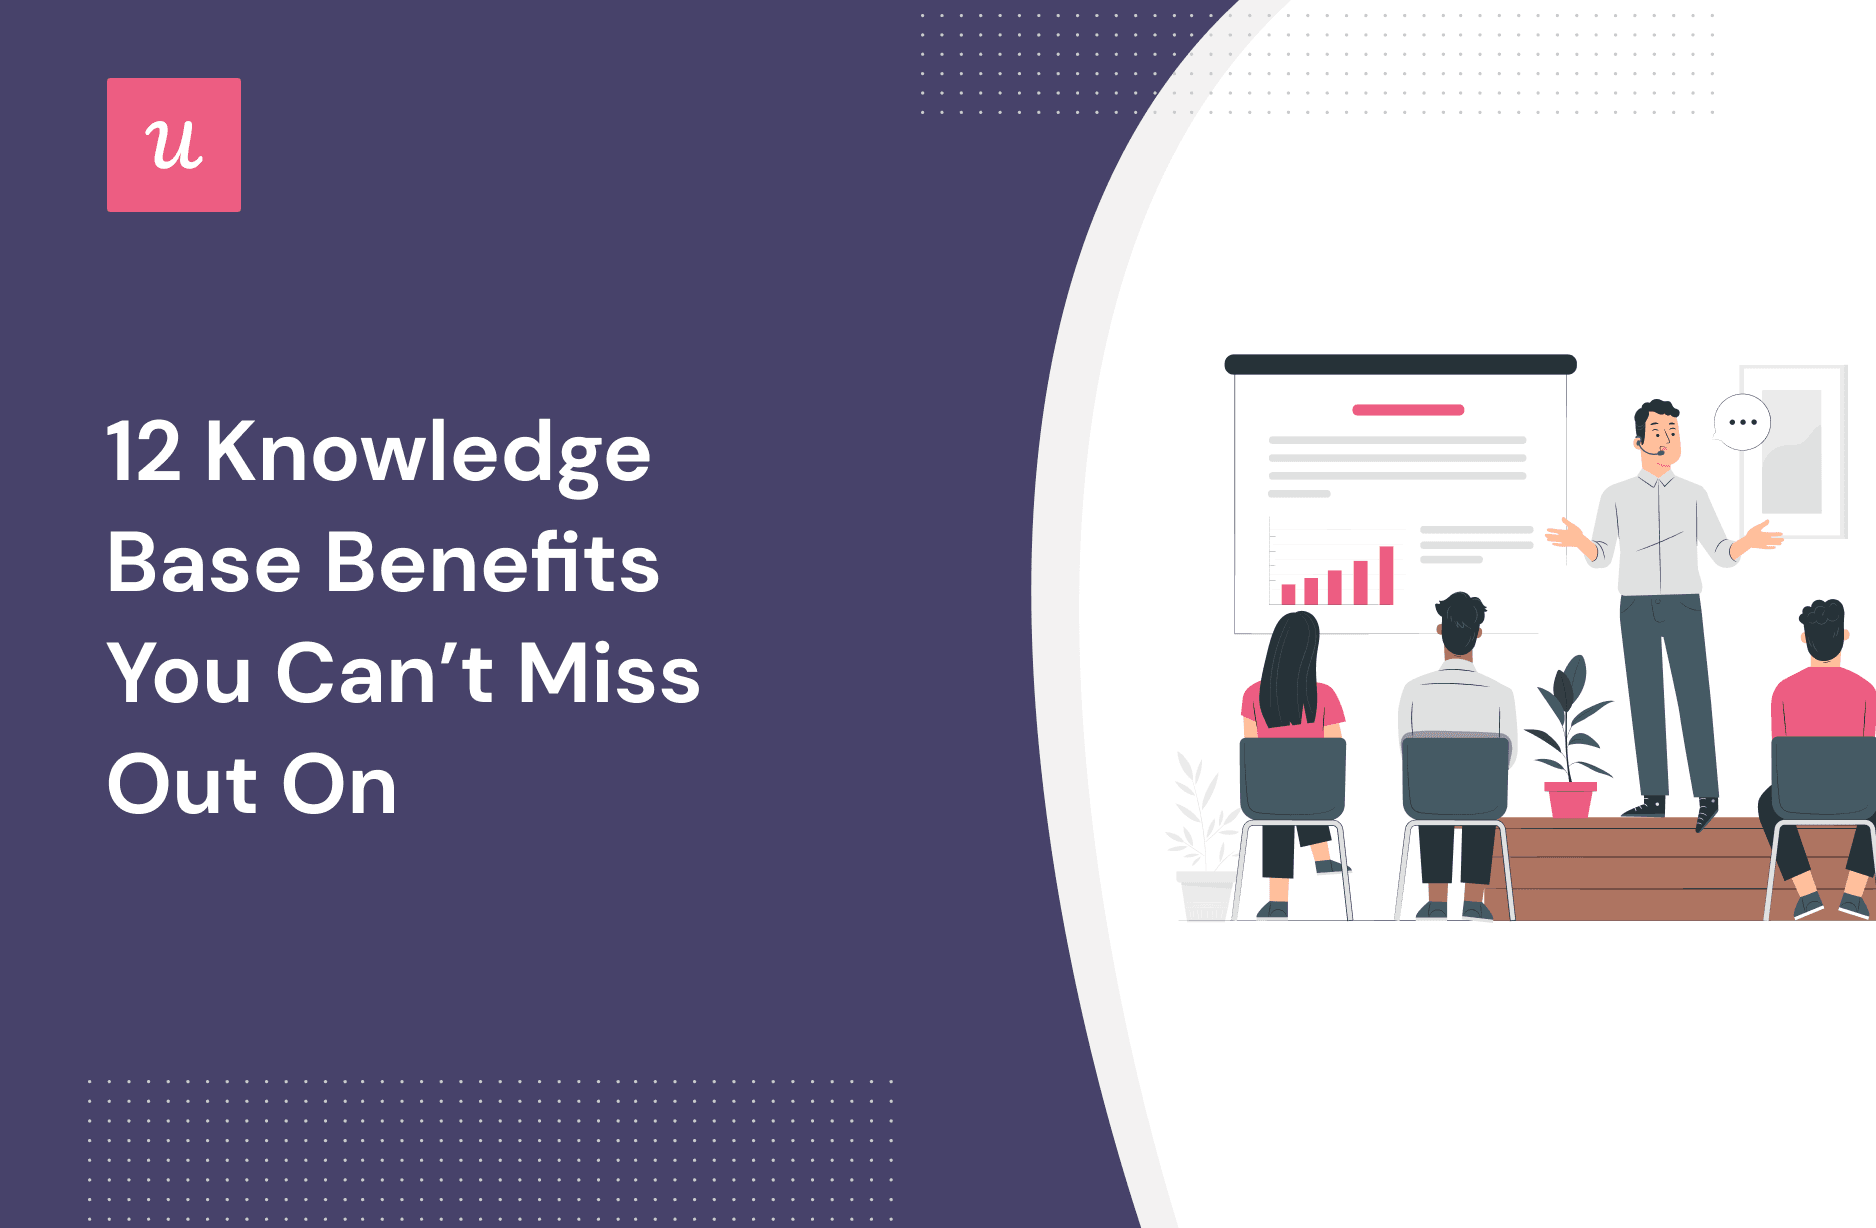 12 Knowledge Base Benefits You Can’t Miss Out On cover